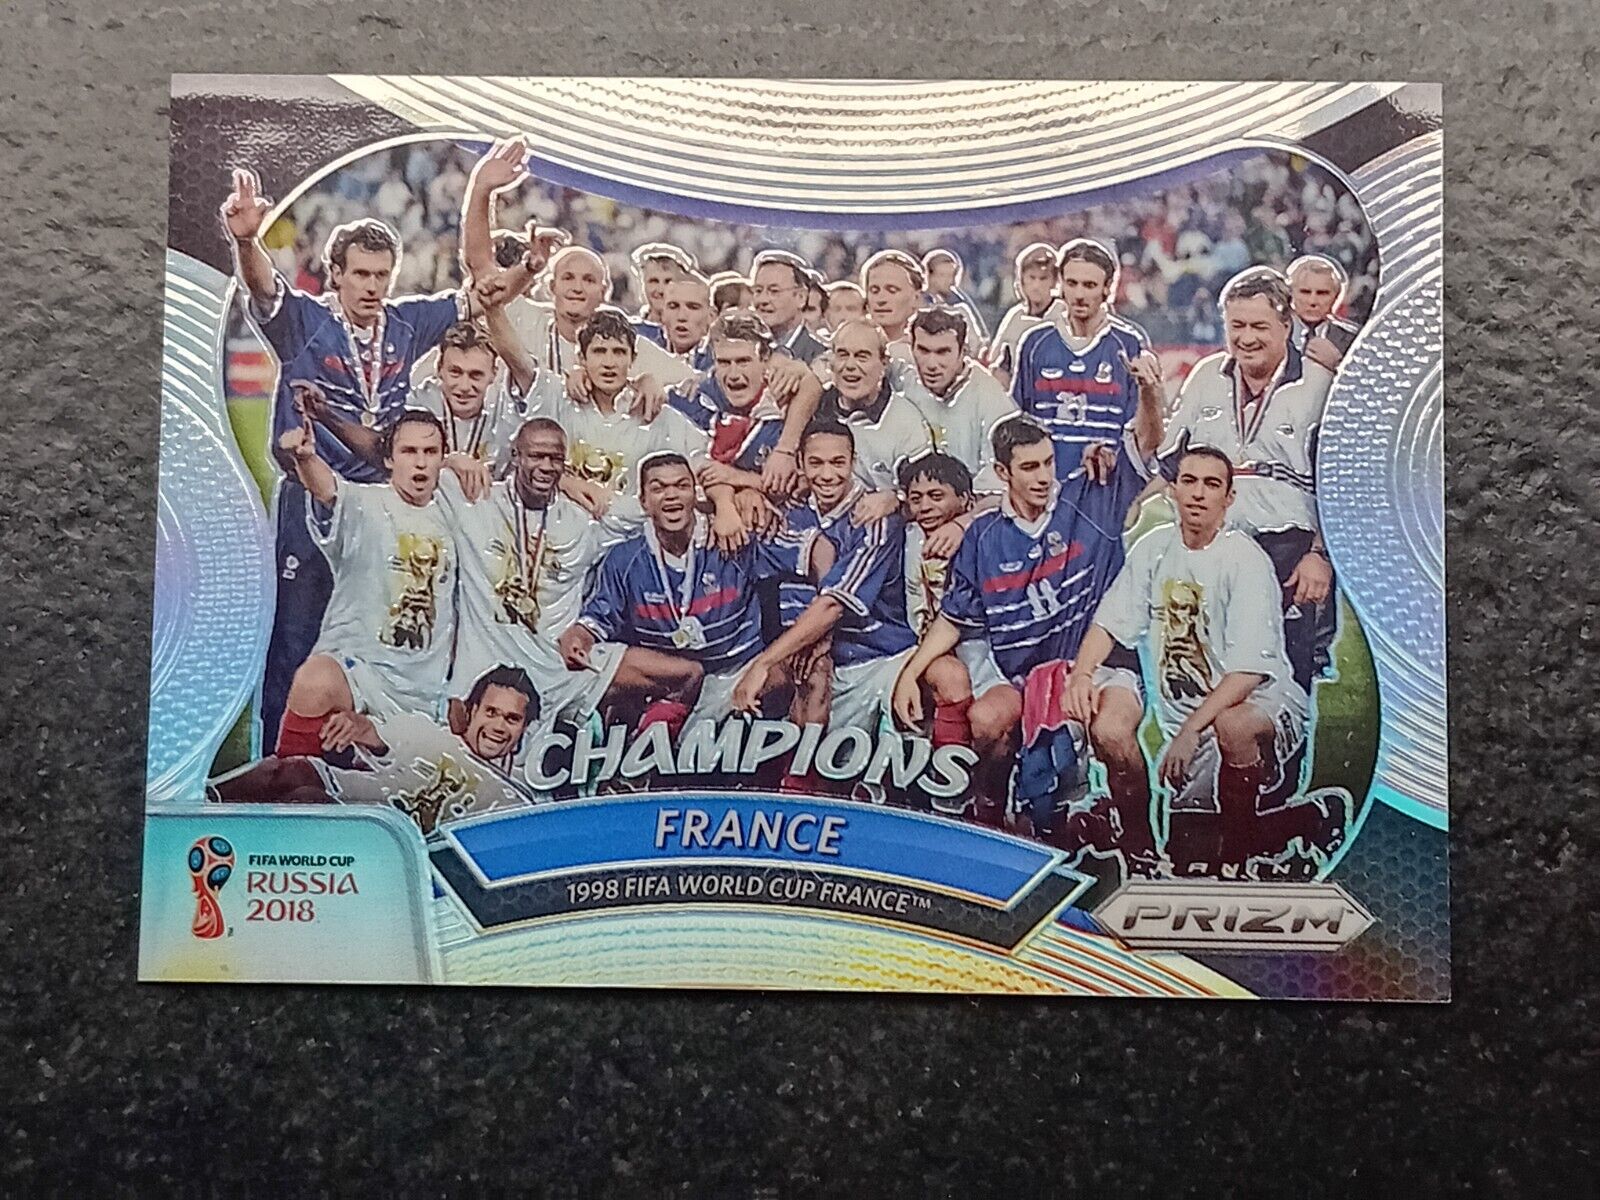 1998 PANINI PRIZM WORLD CUP CHAMPIONS FRANCE CH-5 WITH ZIDANE, WHITE, HENRY